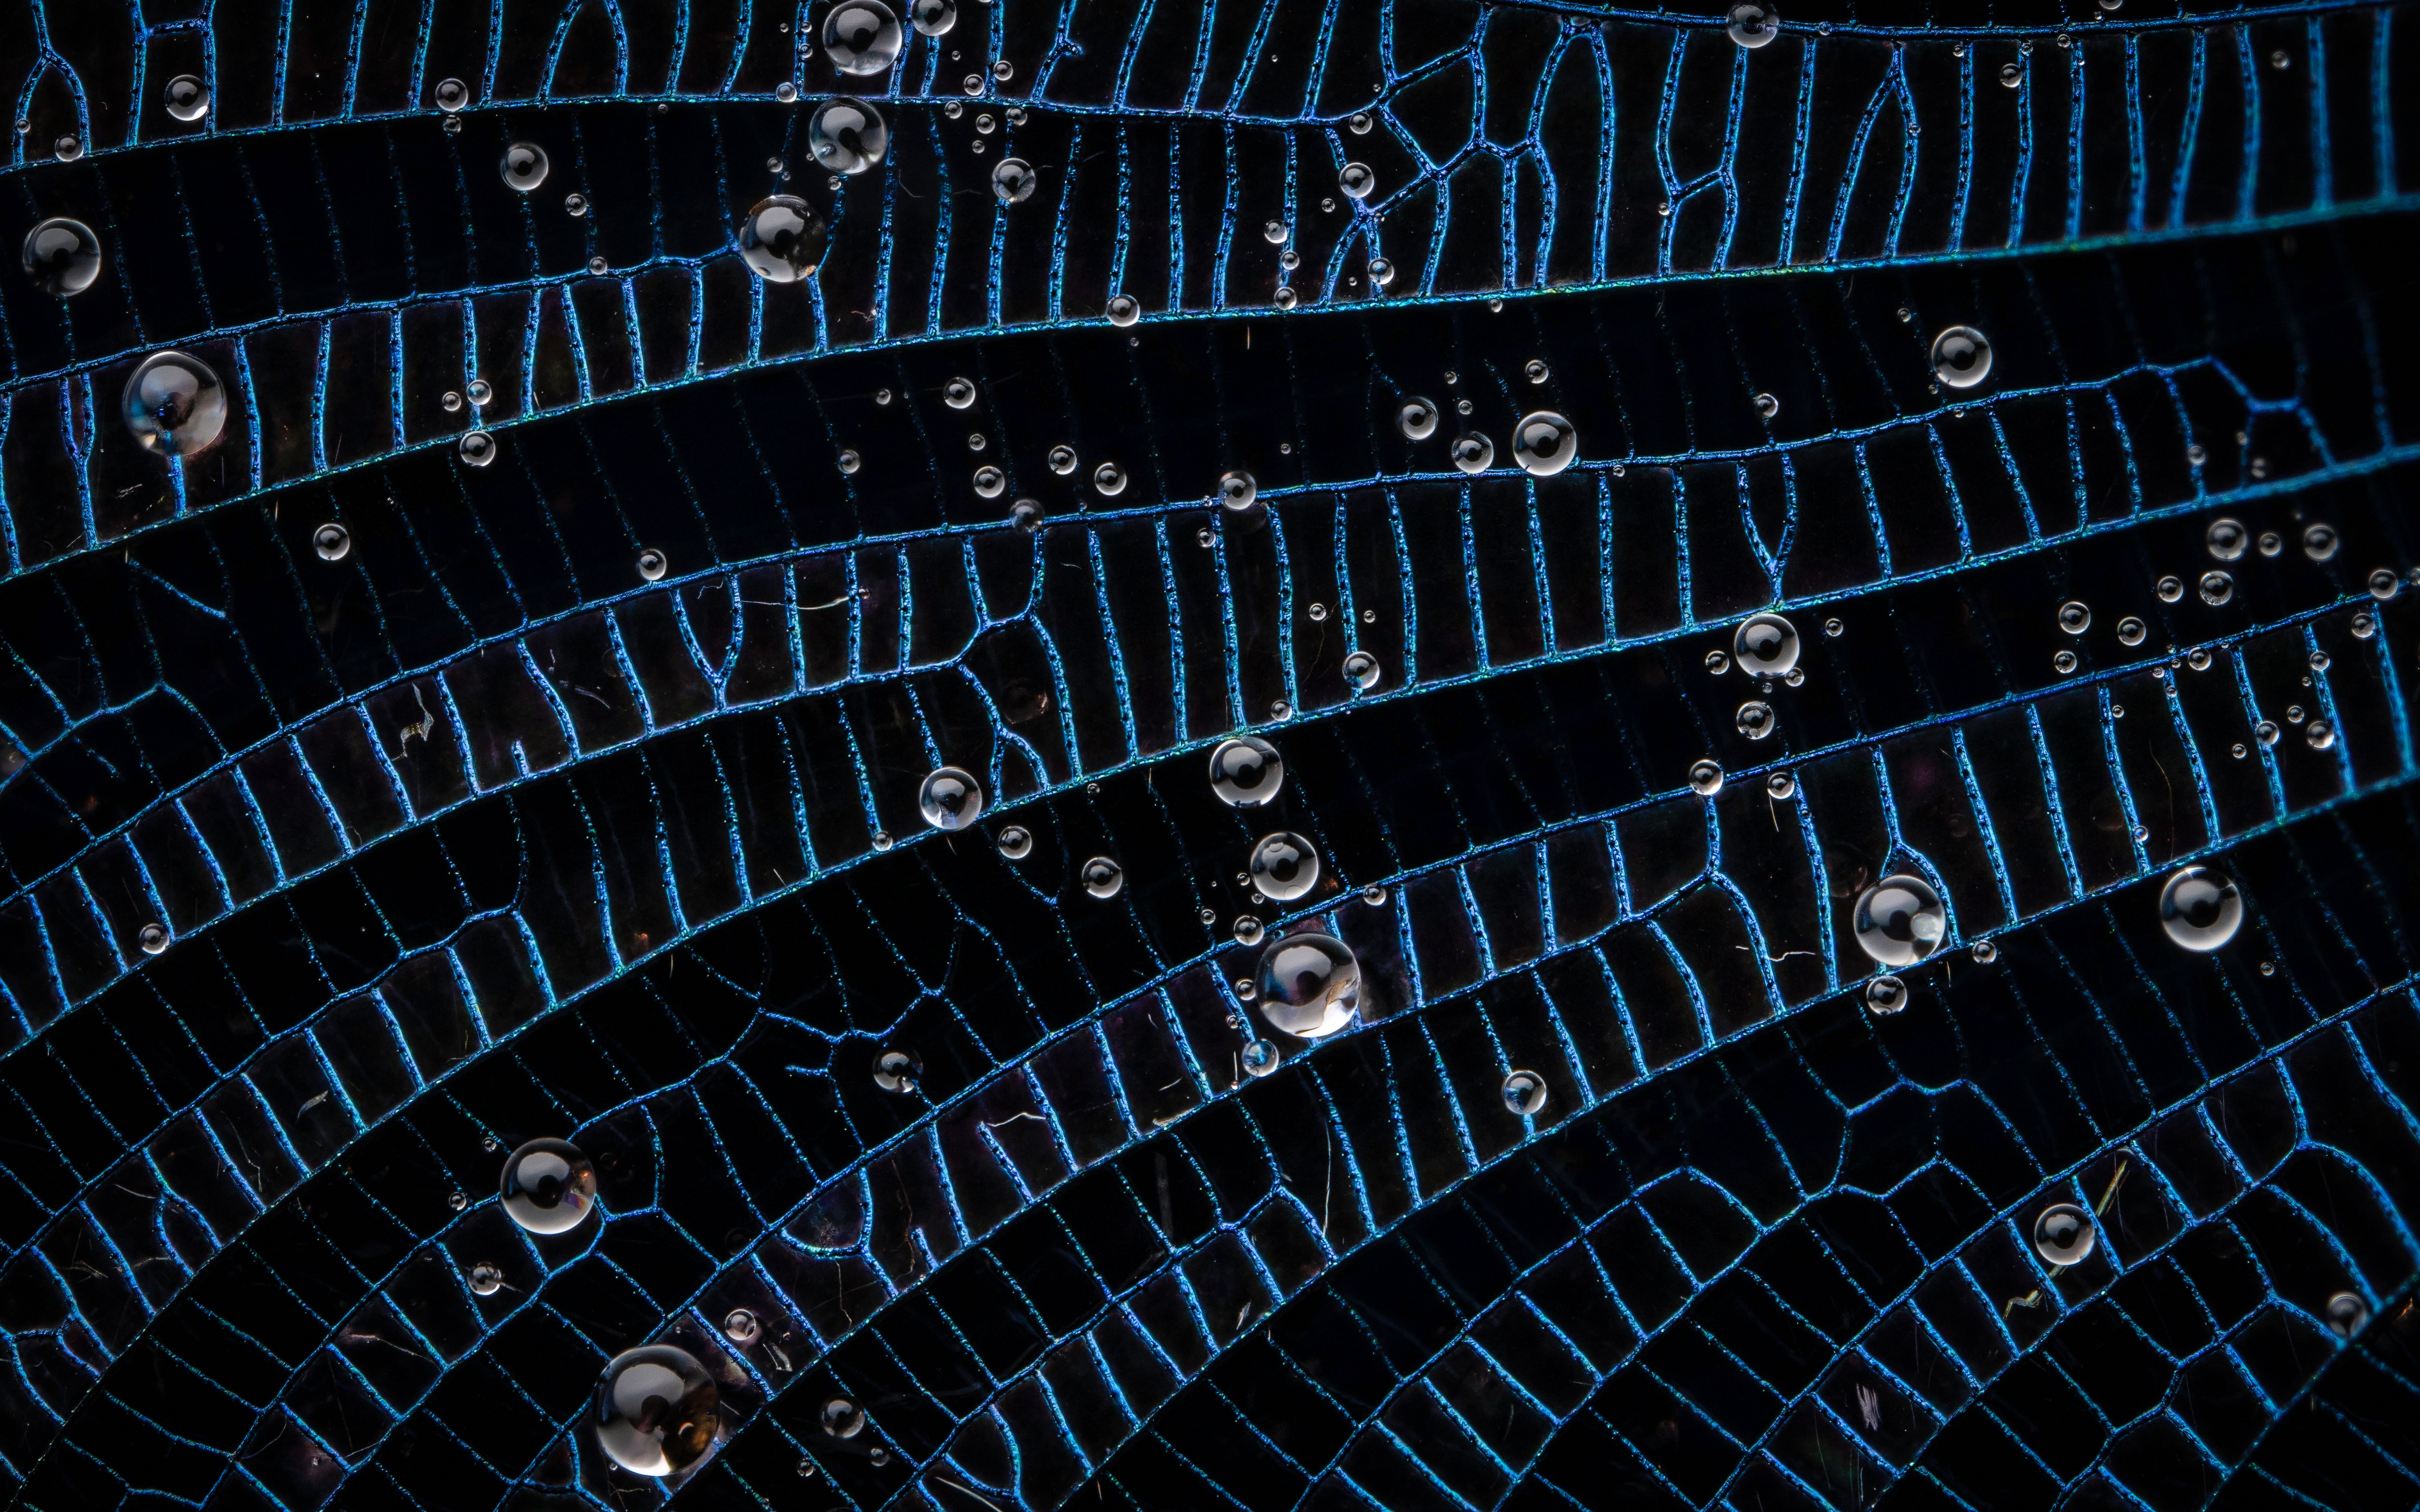 The wing of a damselfly. (Photo: Nathan Benstead)